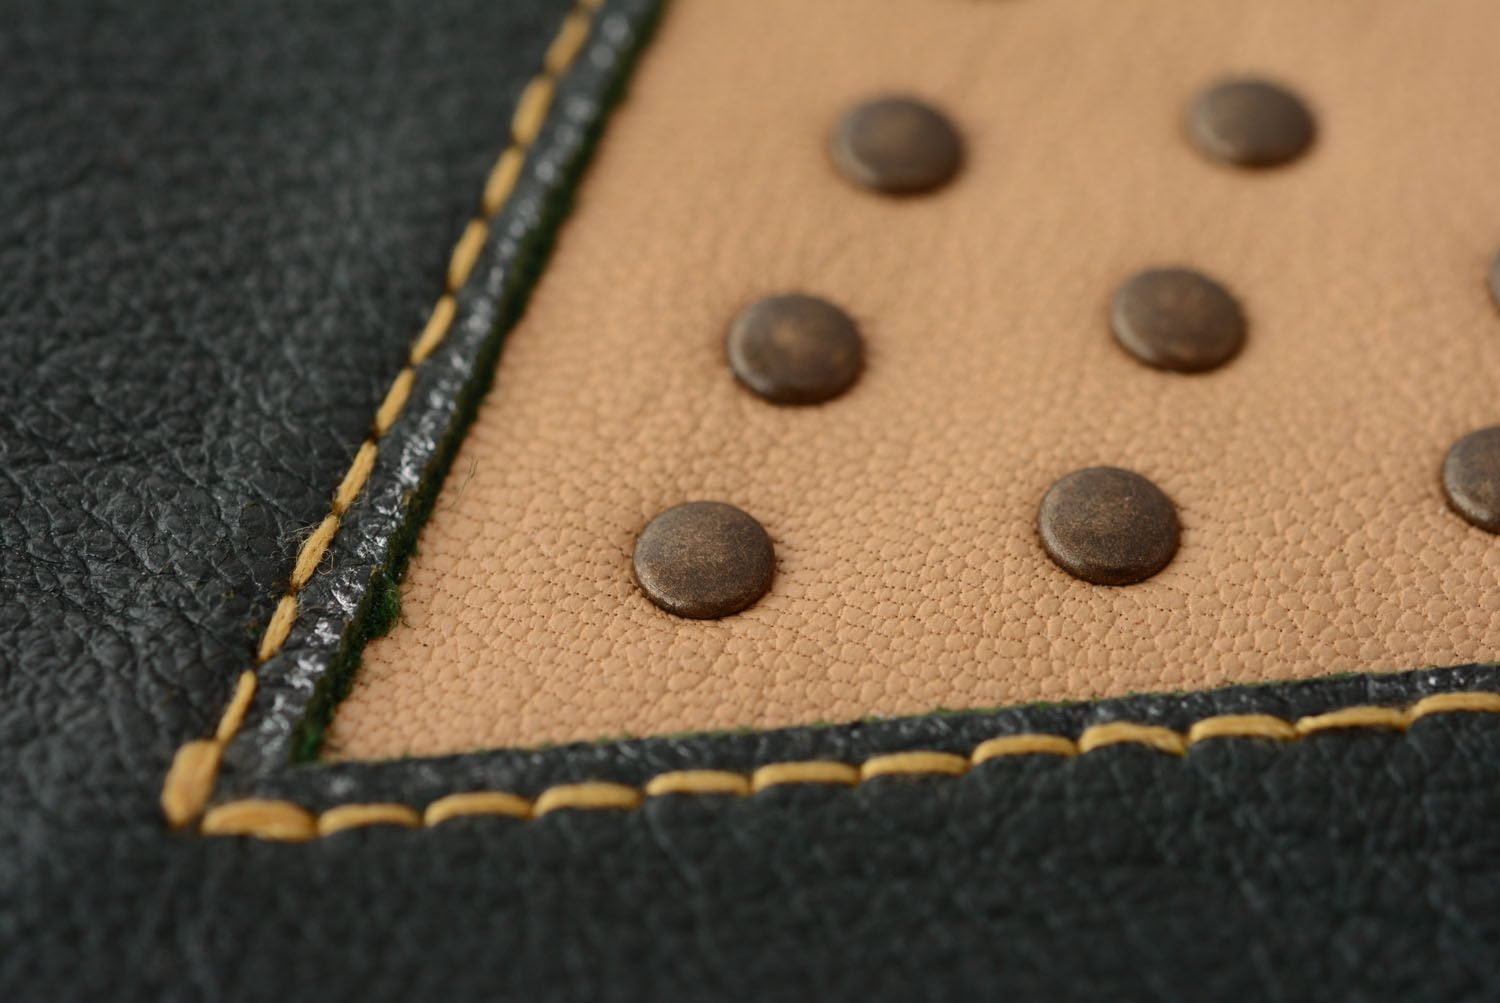 Leather passport cover photo 5